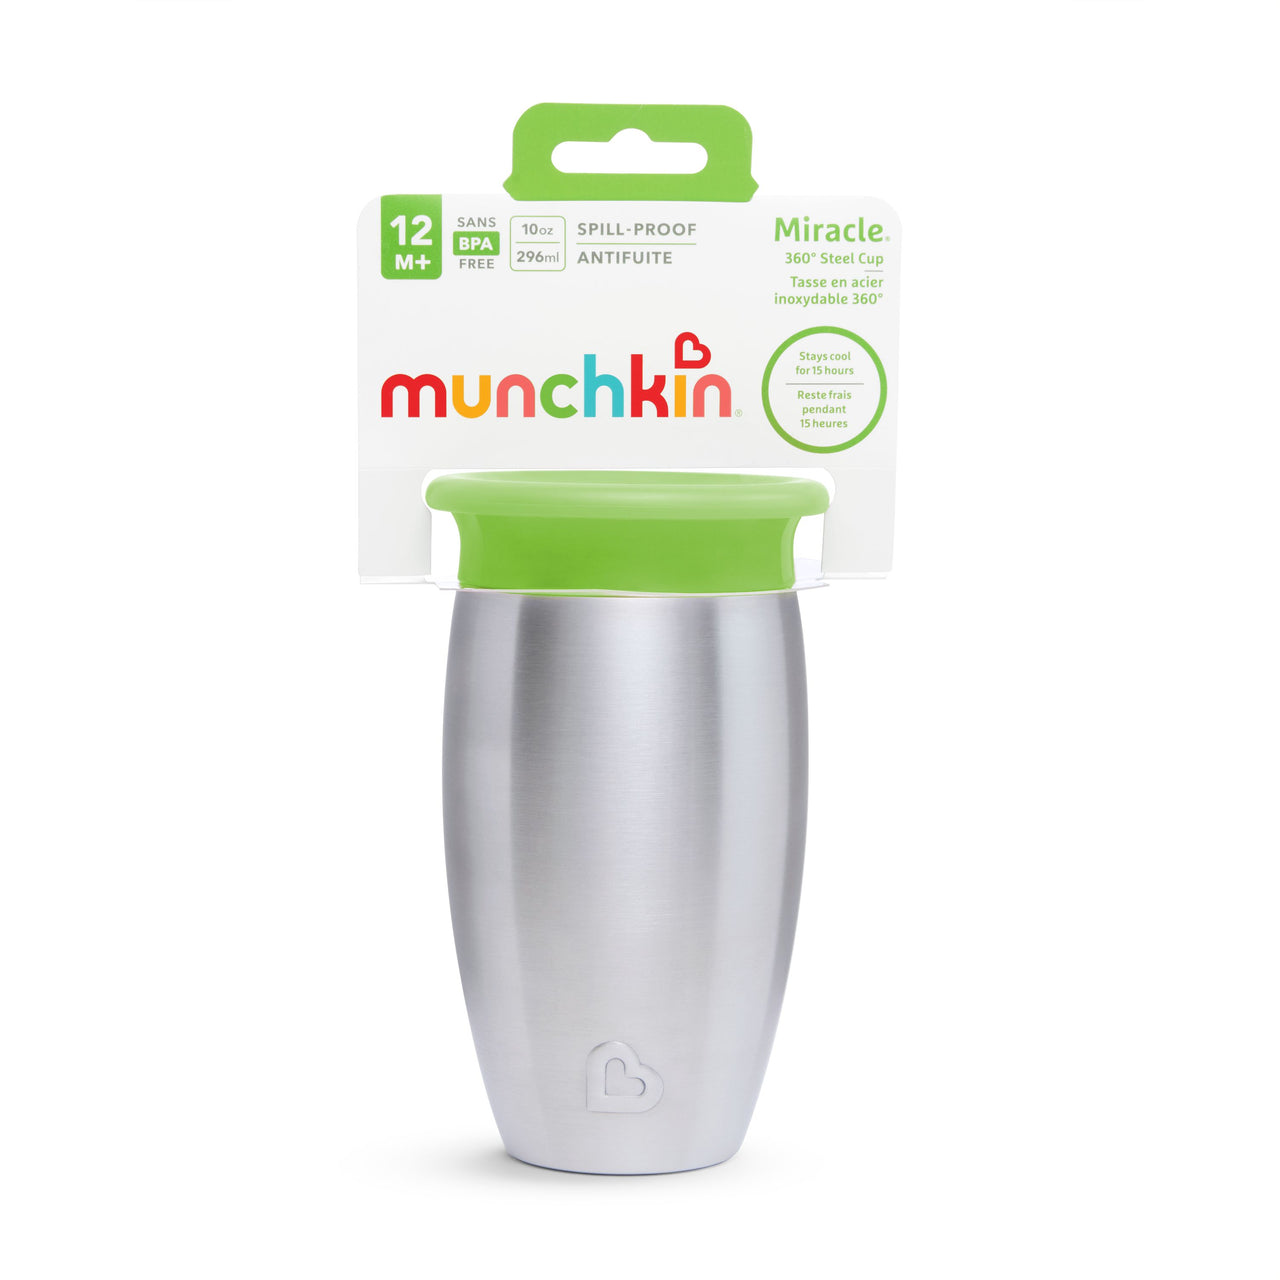 Munchkin Miracle 360 Steel Cup